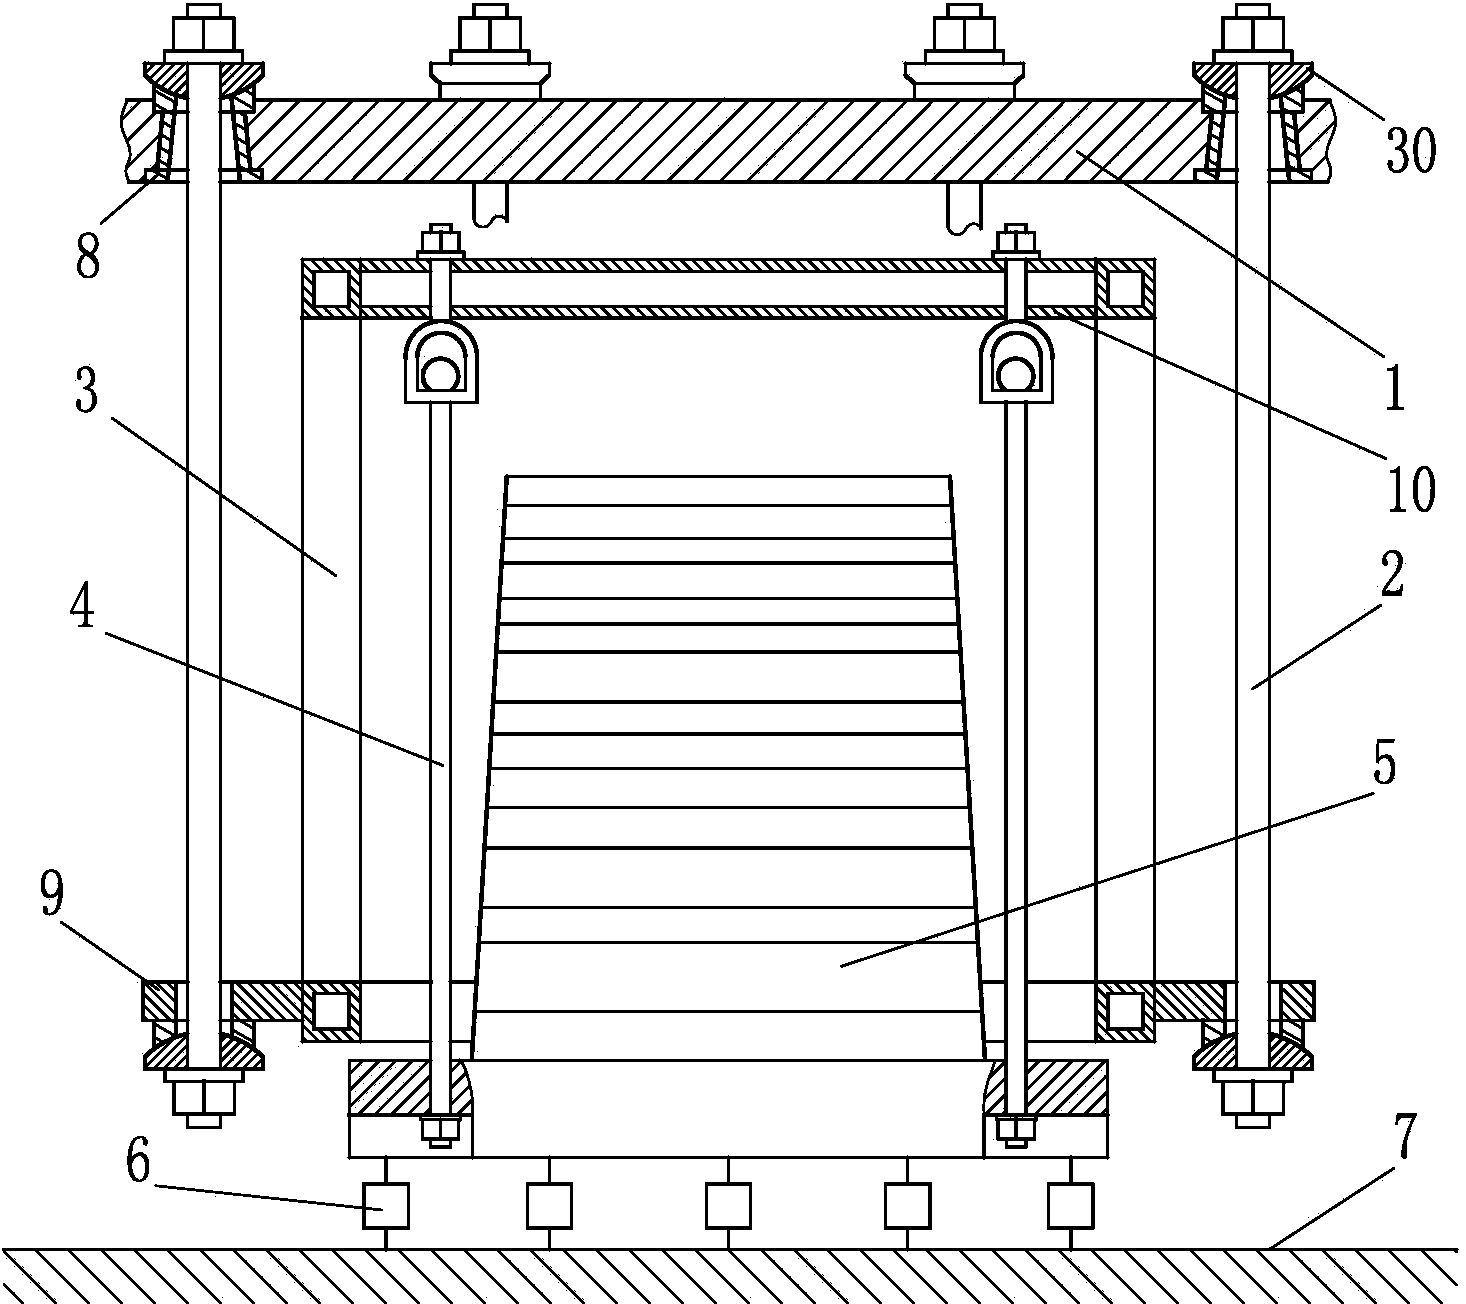 Low-frequency swing-type tuned mass damper